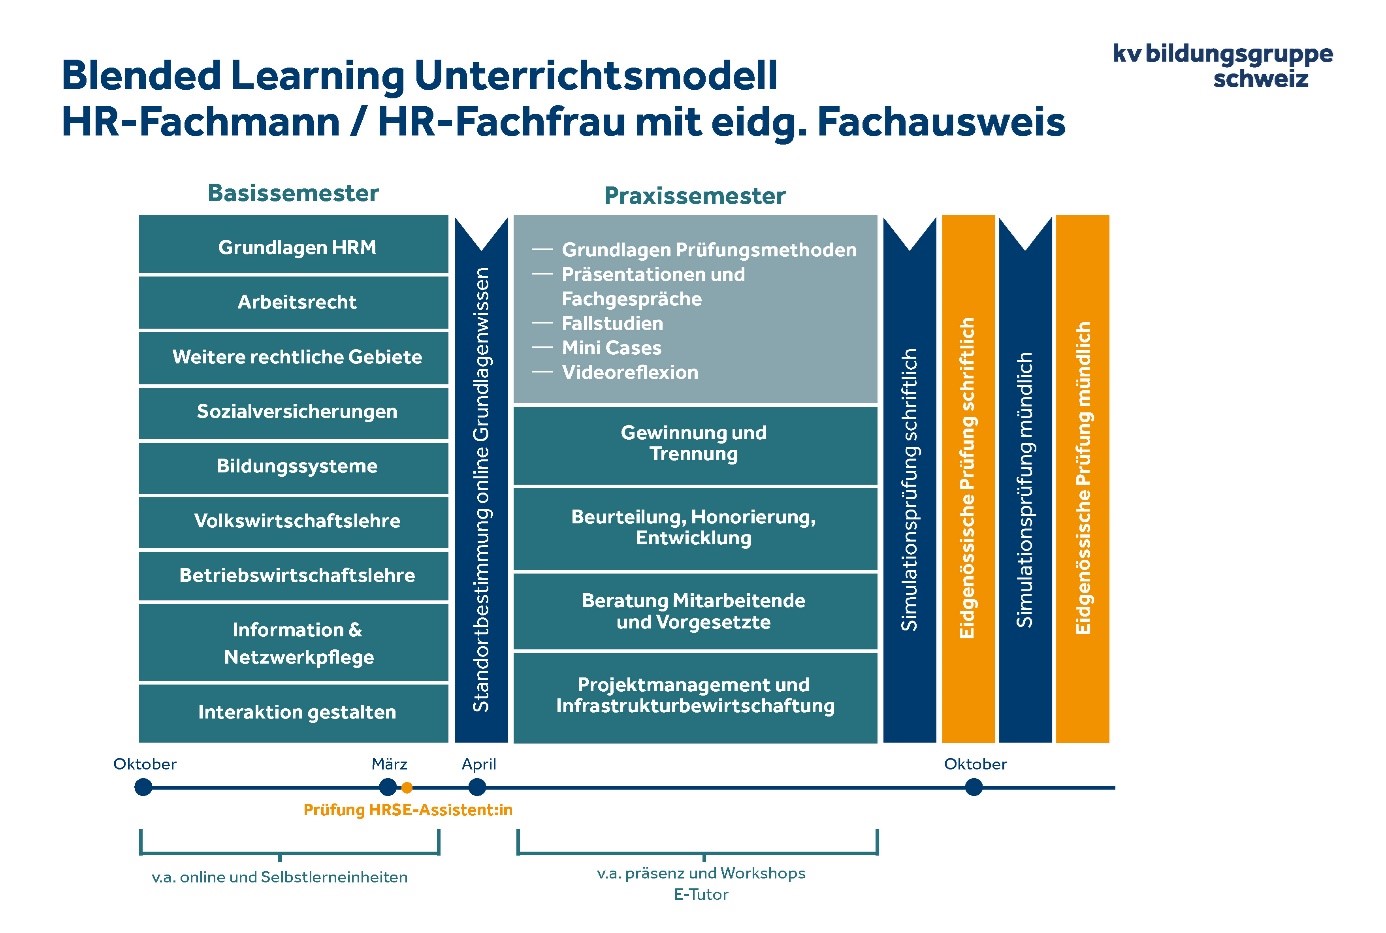 Blended Learning HR-Fachleute